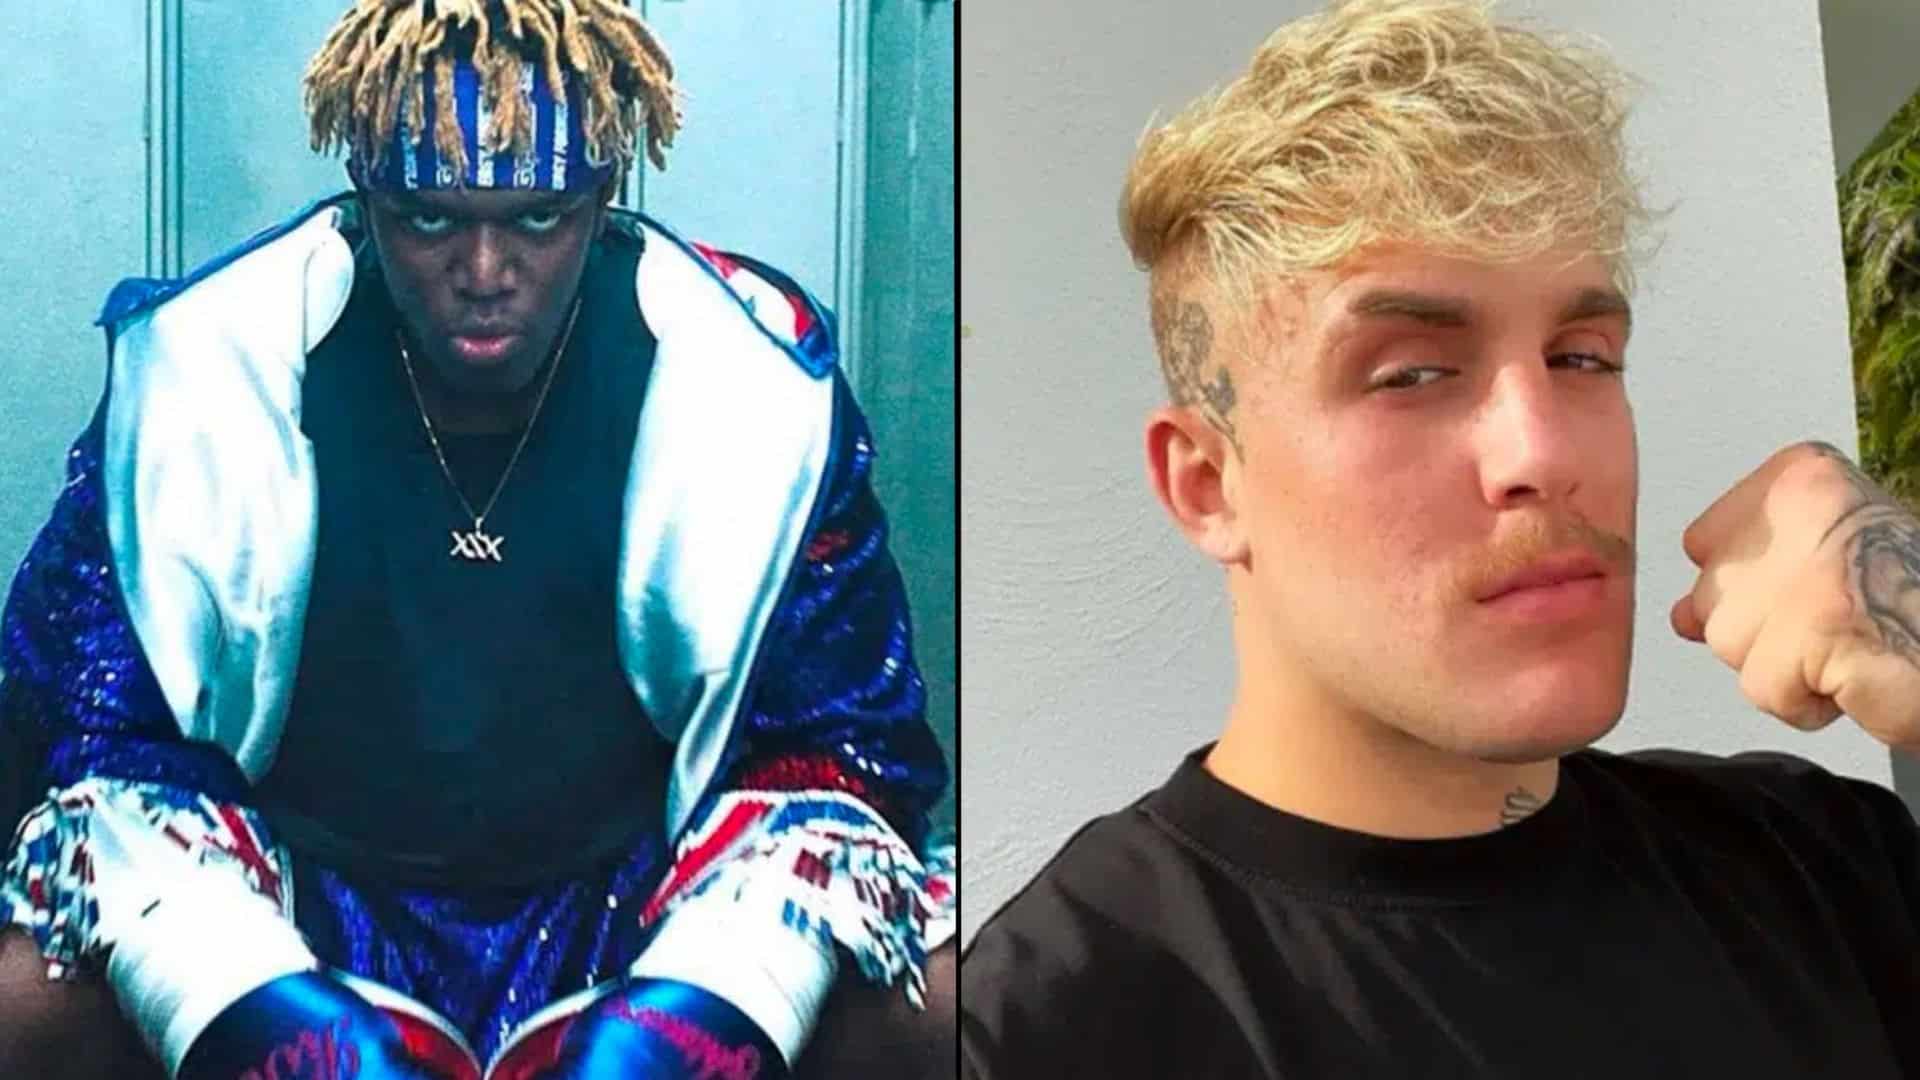 KSI and Jake Paul side-by-side with fists balled